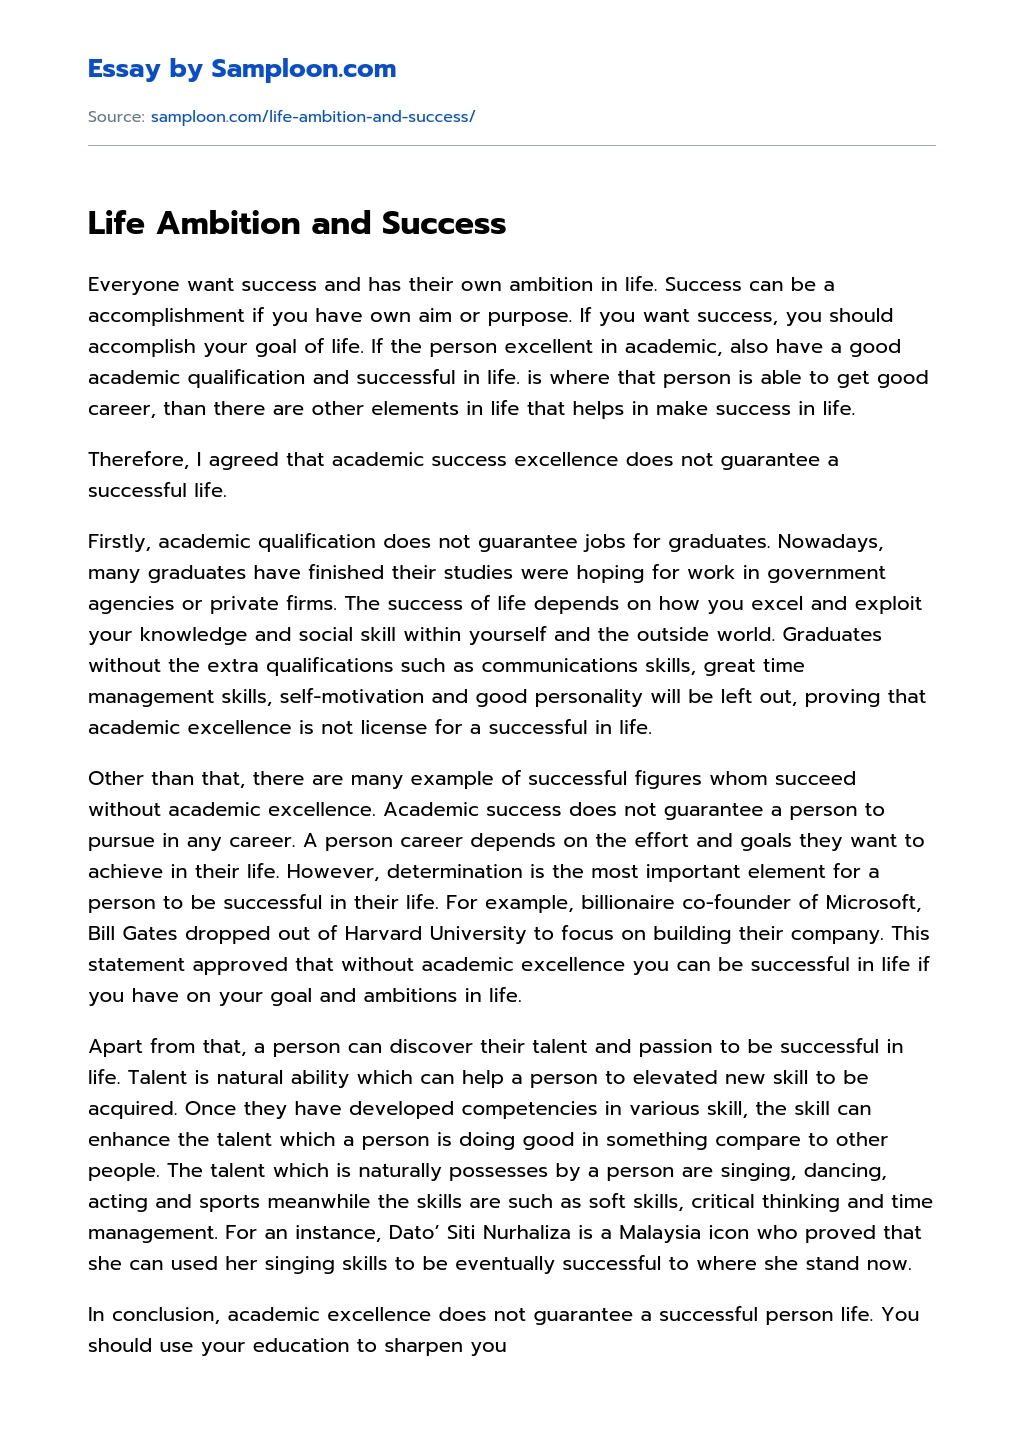 Life Ambition and Success essay